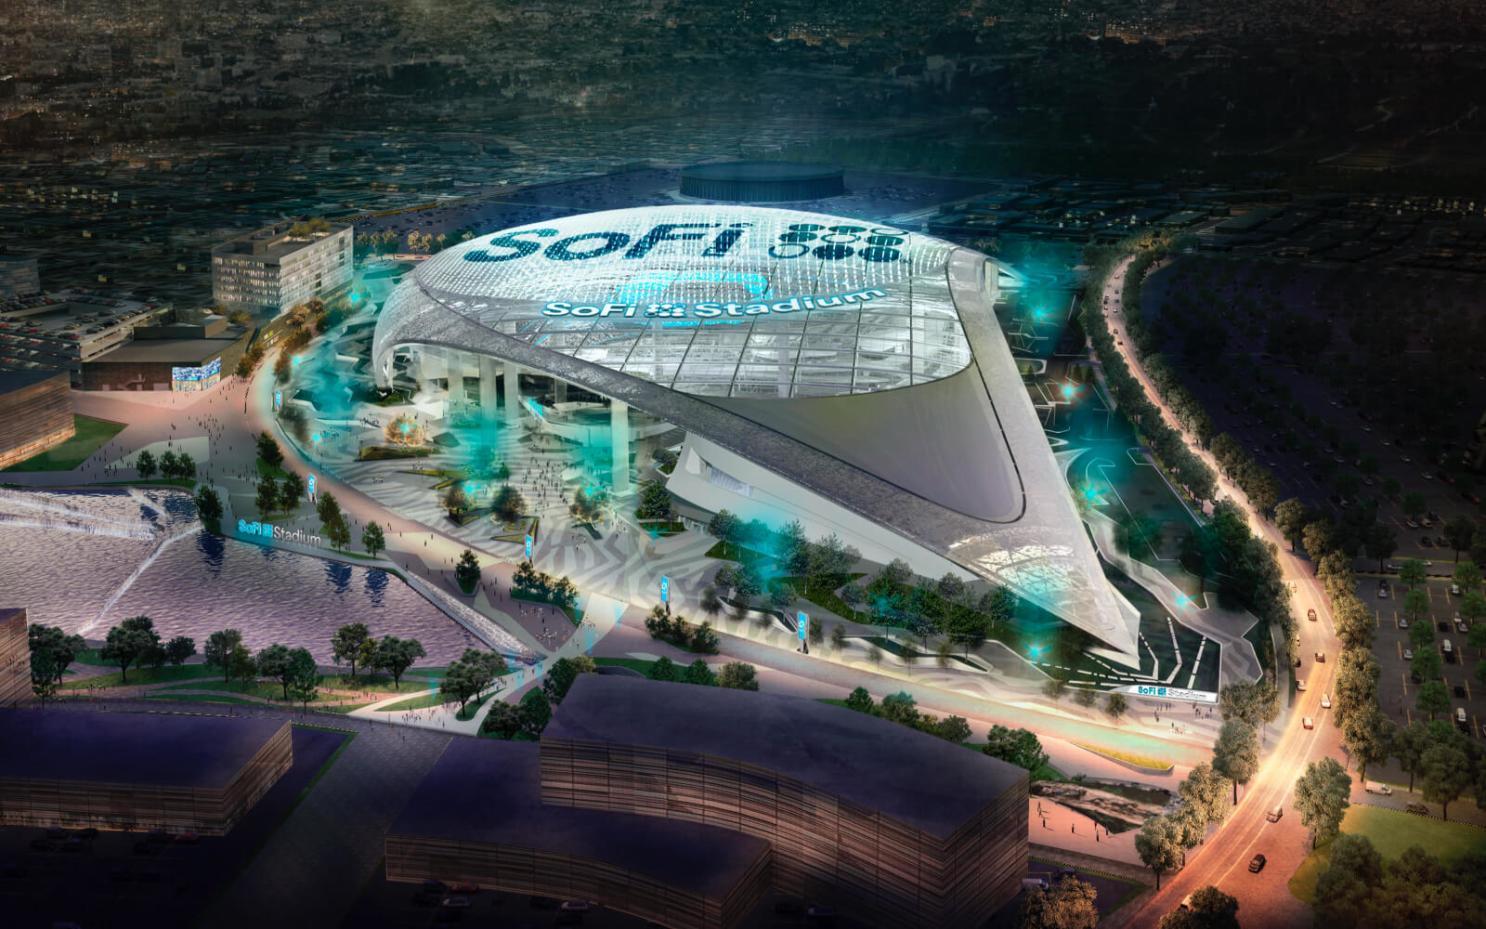 SoFi signed a 20-year agreement for exclusive naming rights for SoFi Stadium in Los Angeles, the future home of the Rams and Chargers NFL teams.